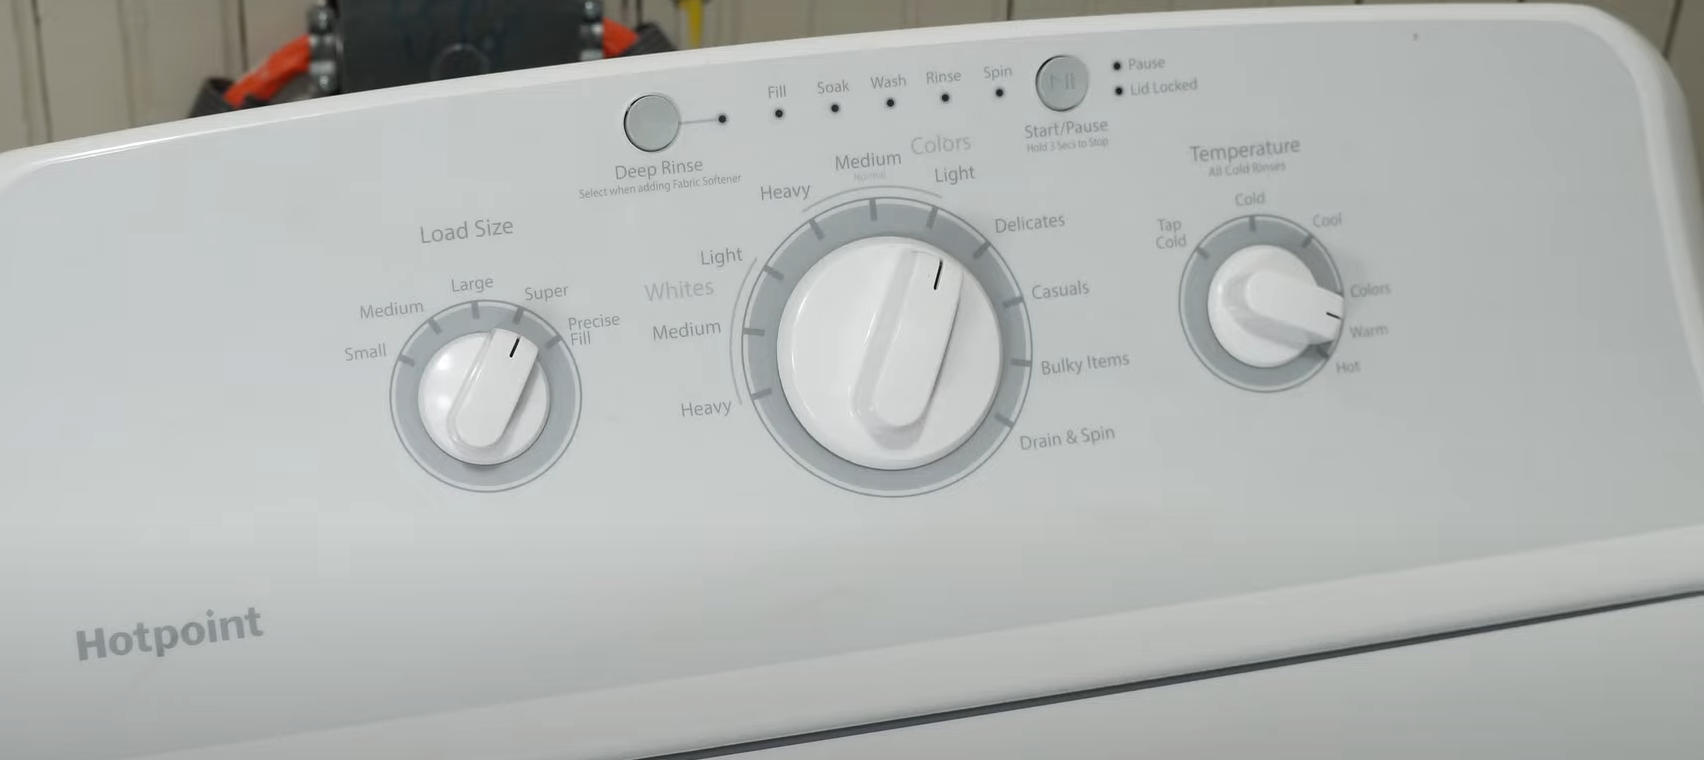 Hotpoint Washing Machine with control panel